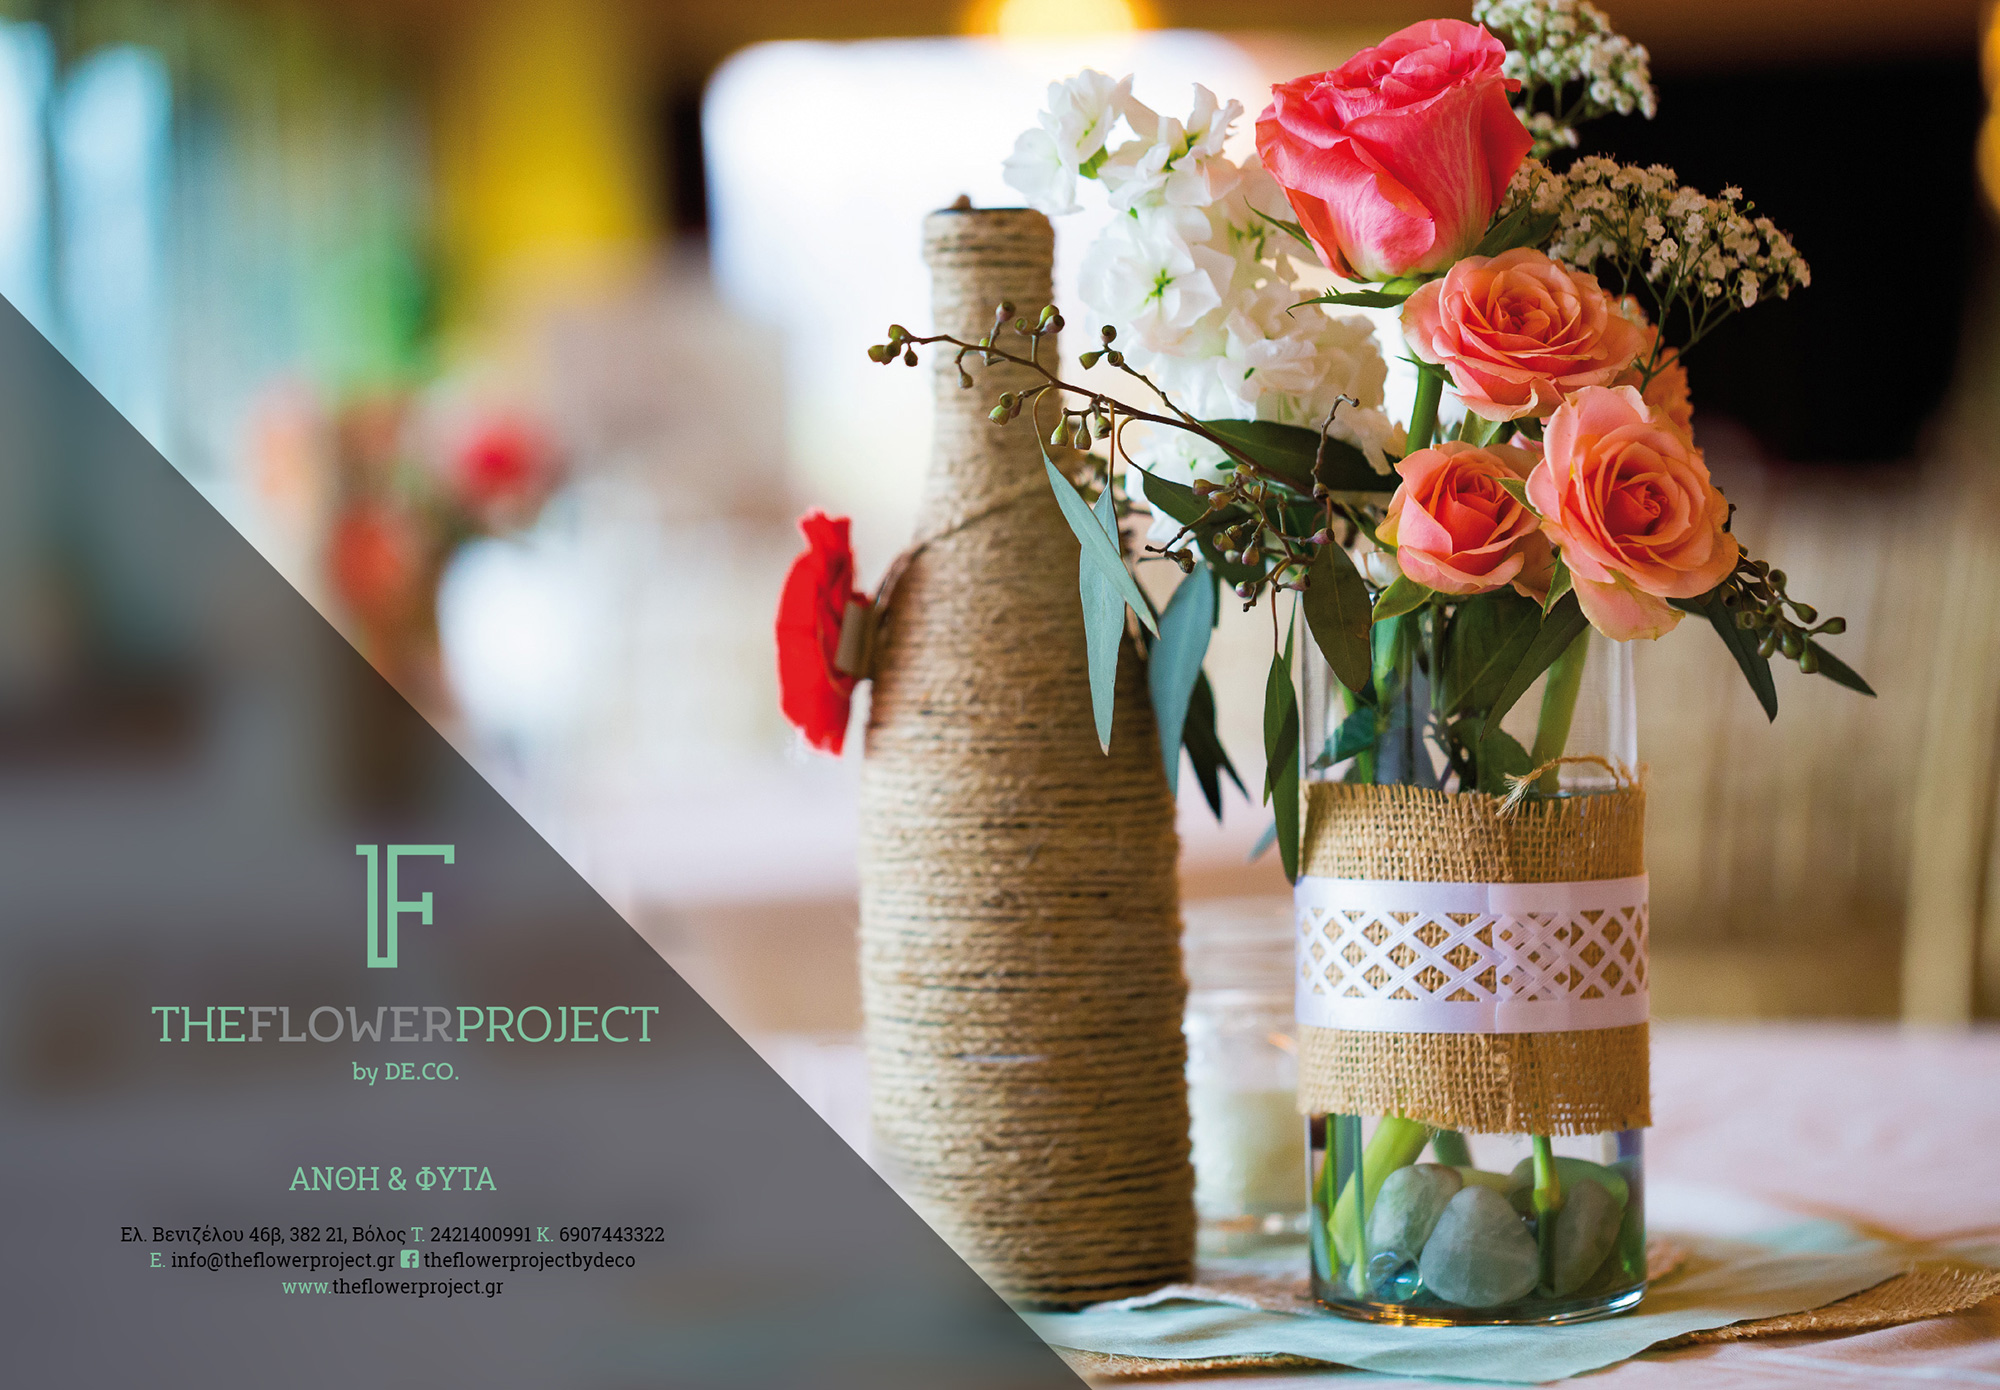 The Flower Project